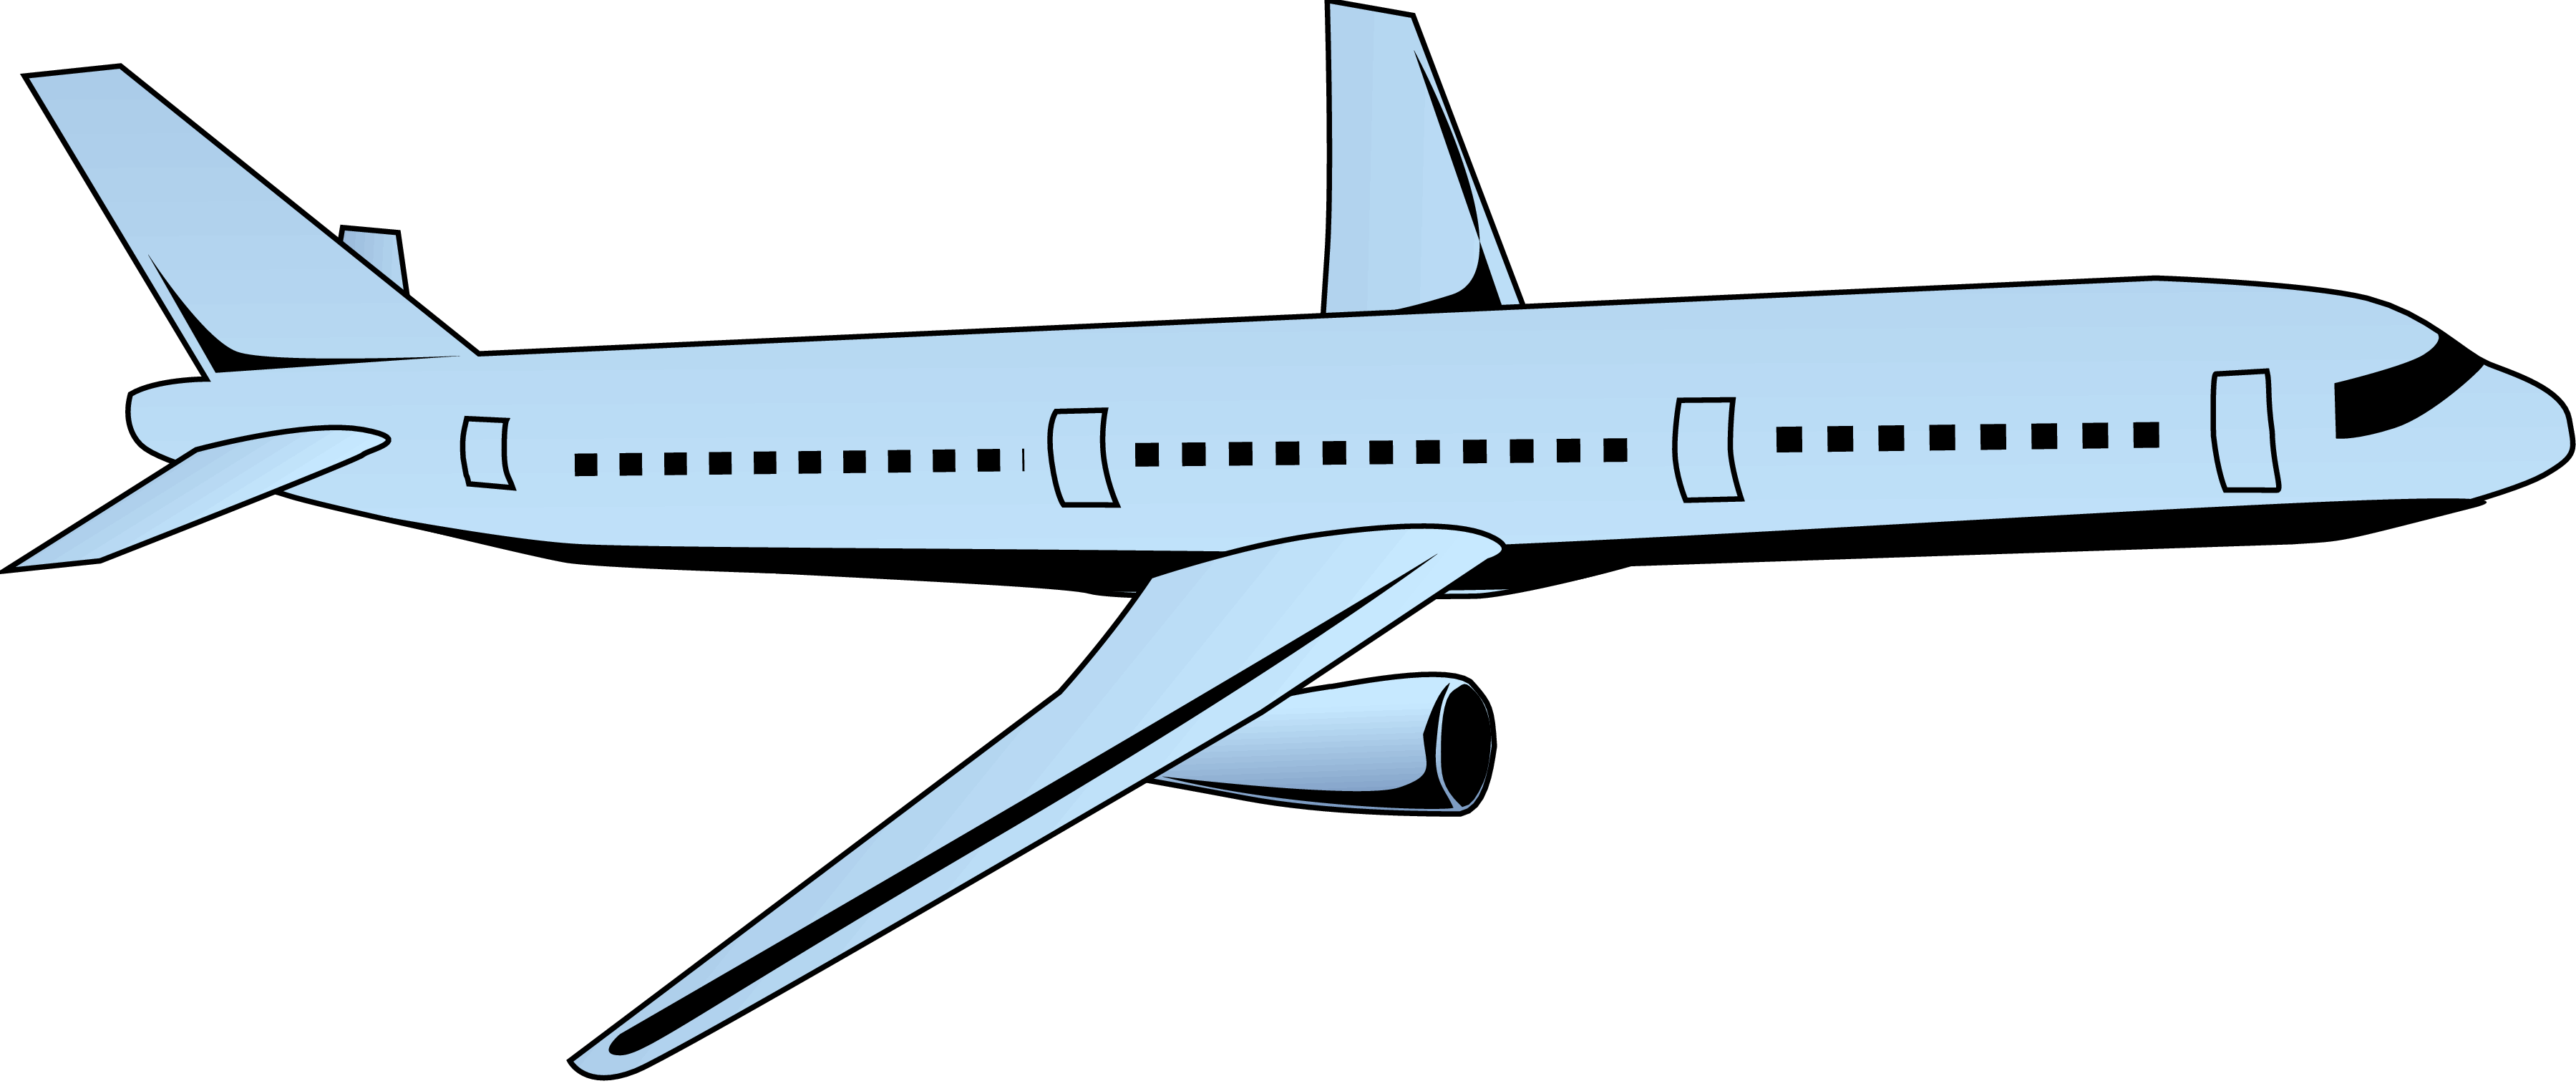 clipart picture of an airplane - photo #41